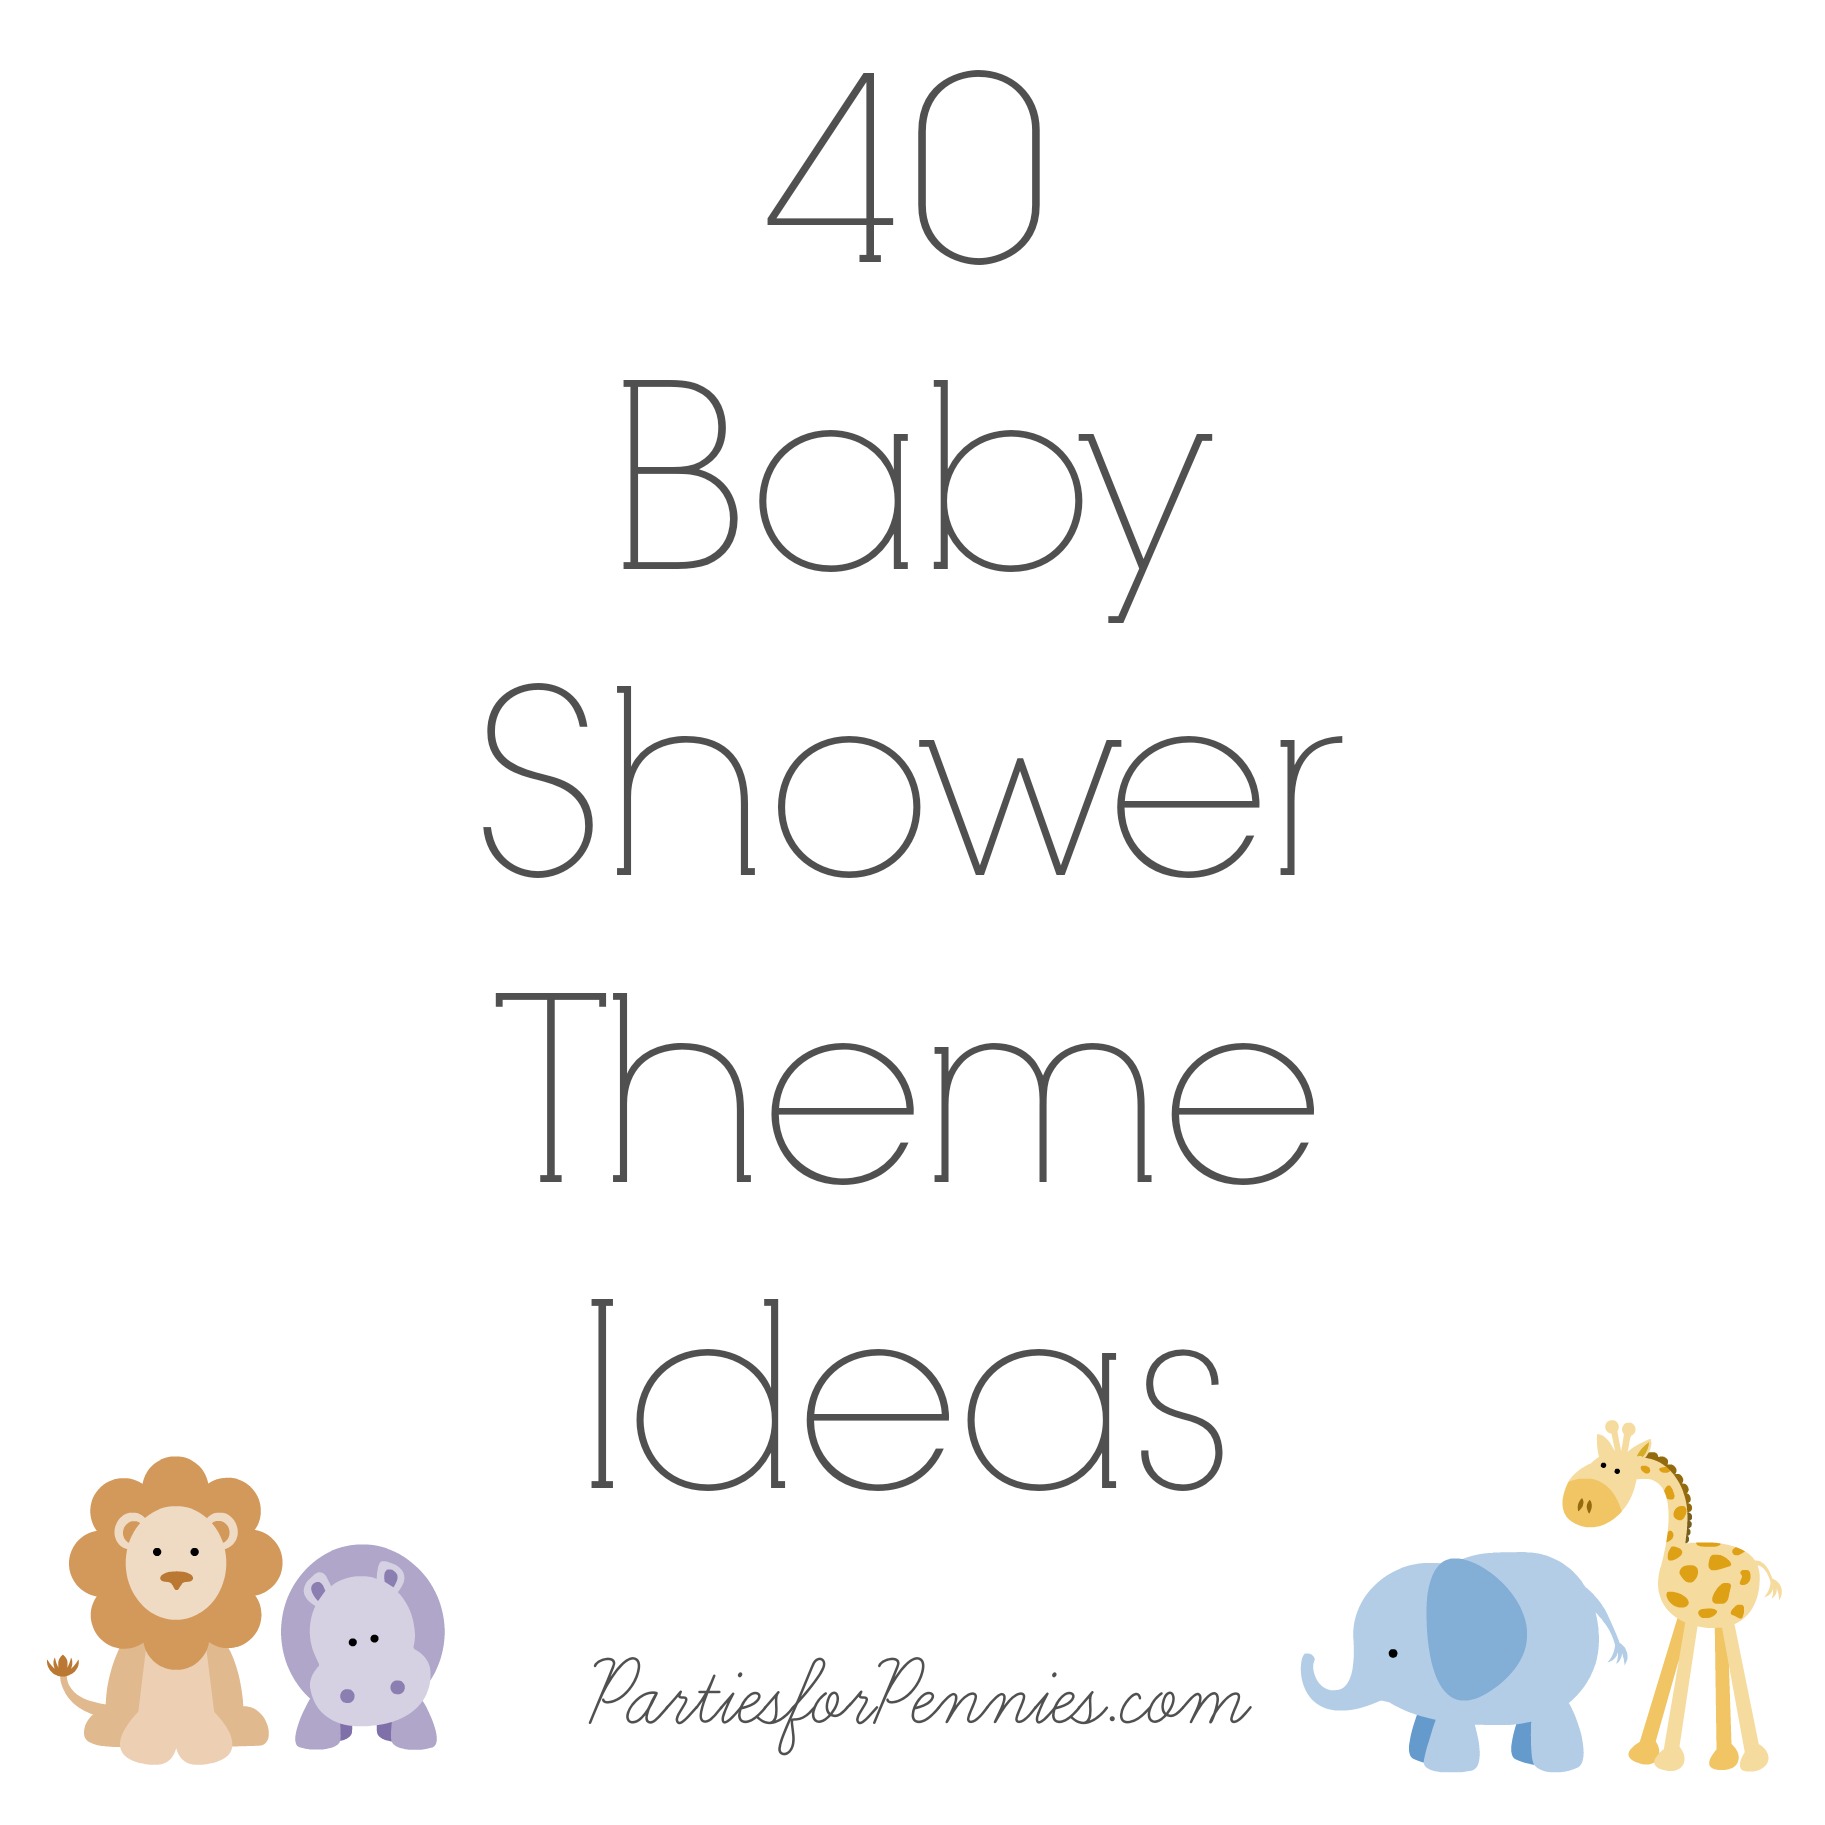 50 Ideas for Planning a Baby Shower | PartiesforPennies.com | 40 Baby Shower Themes